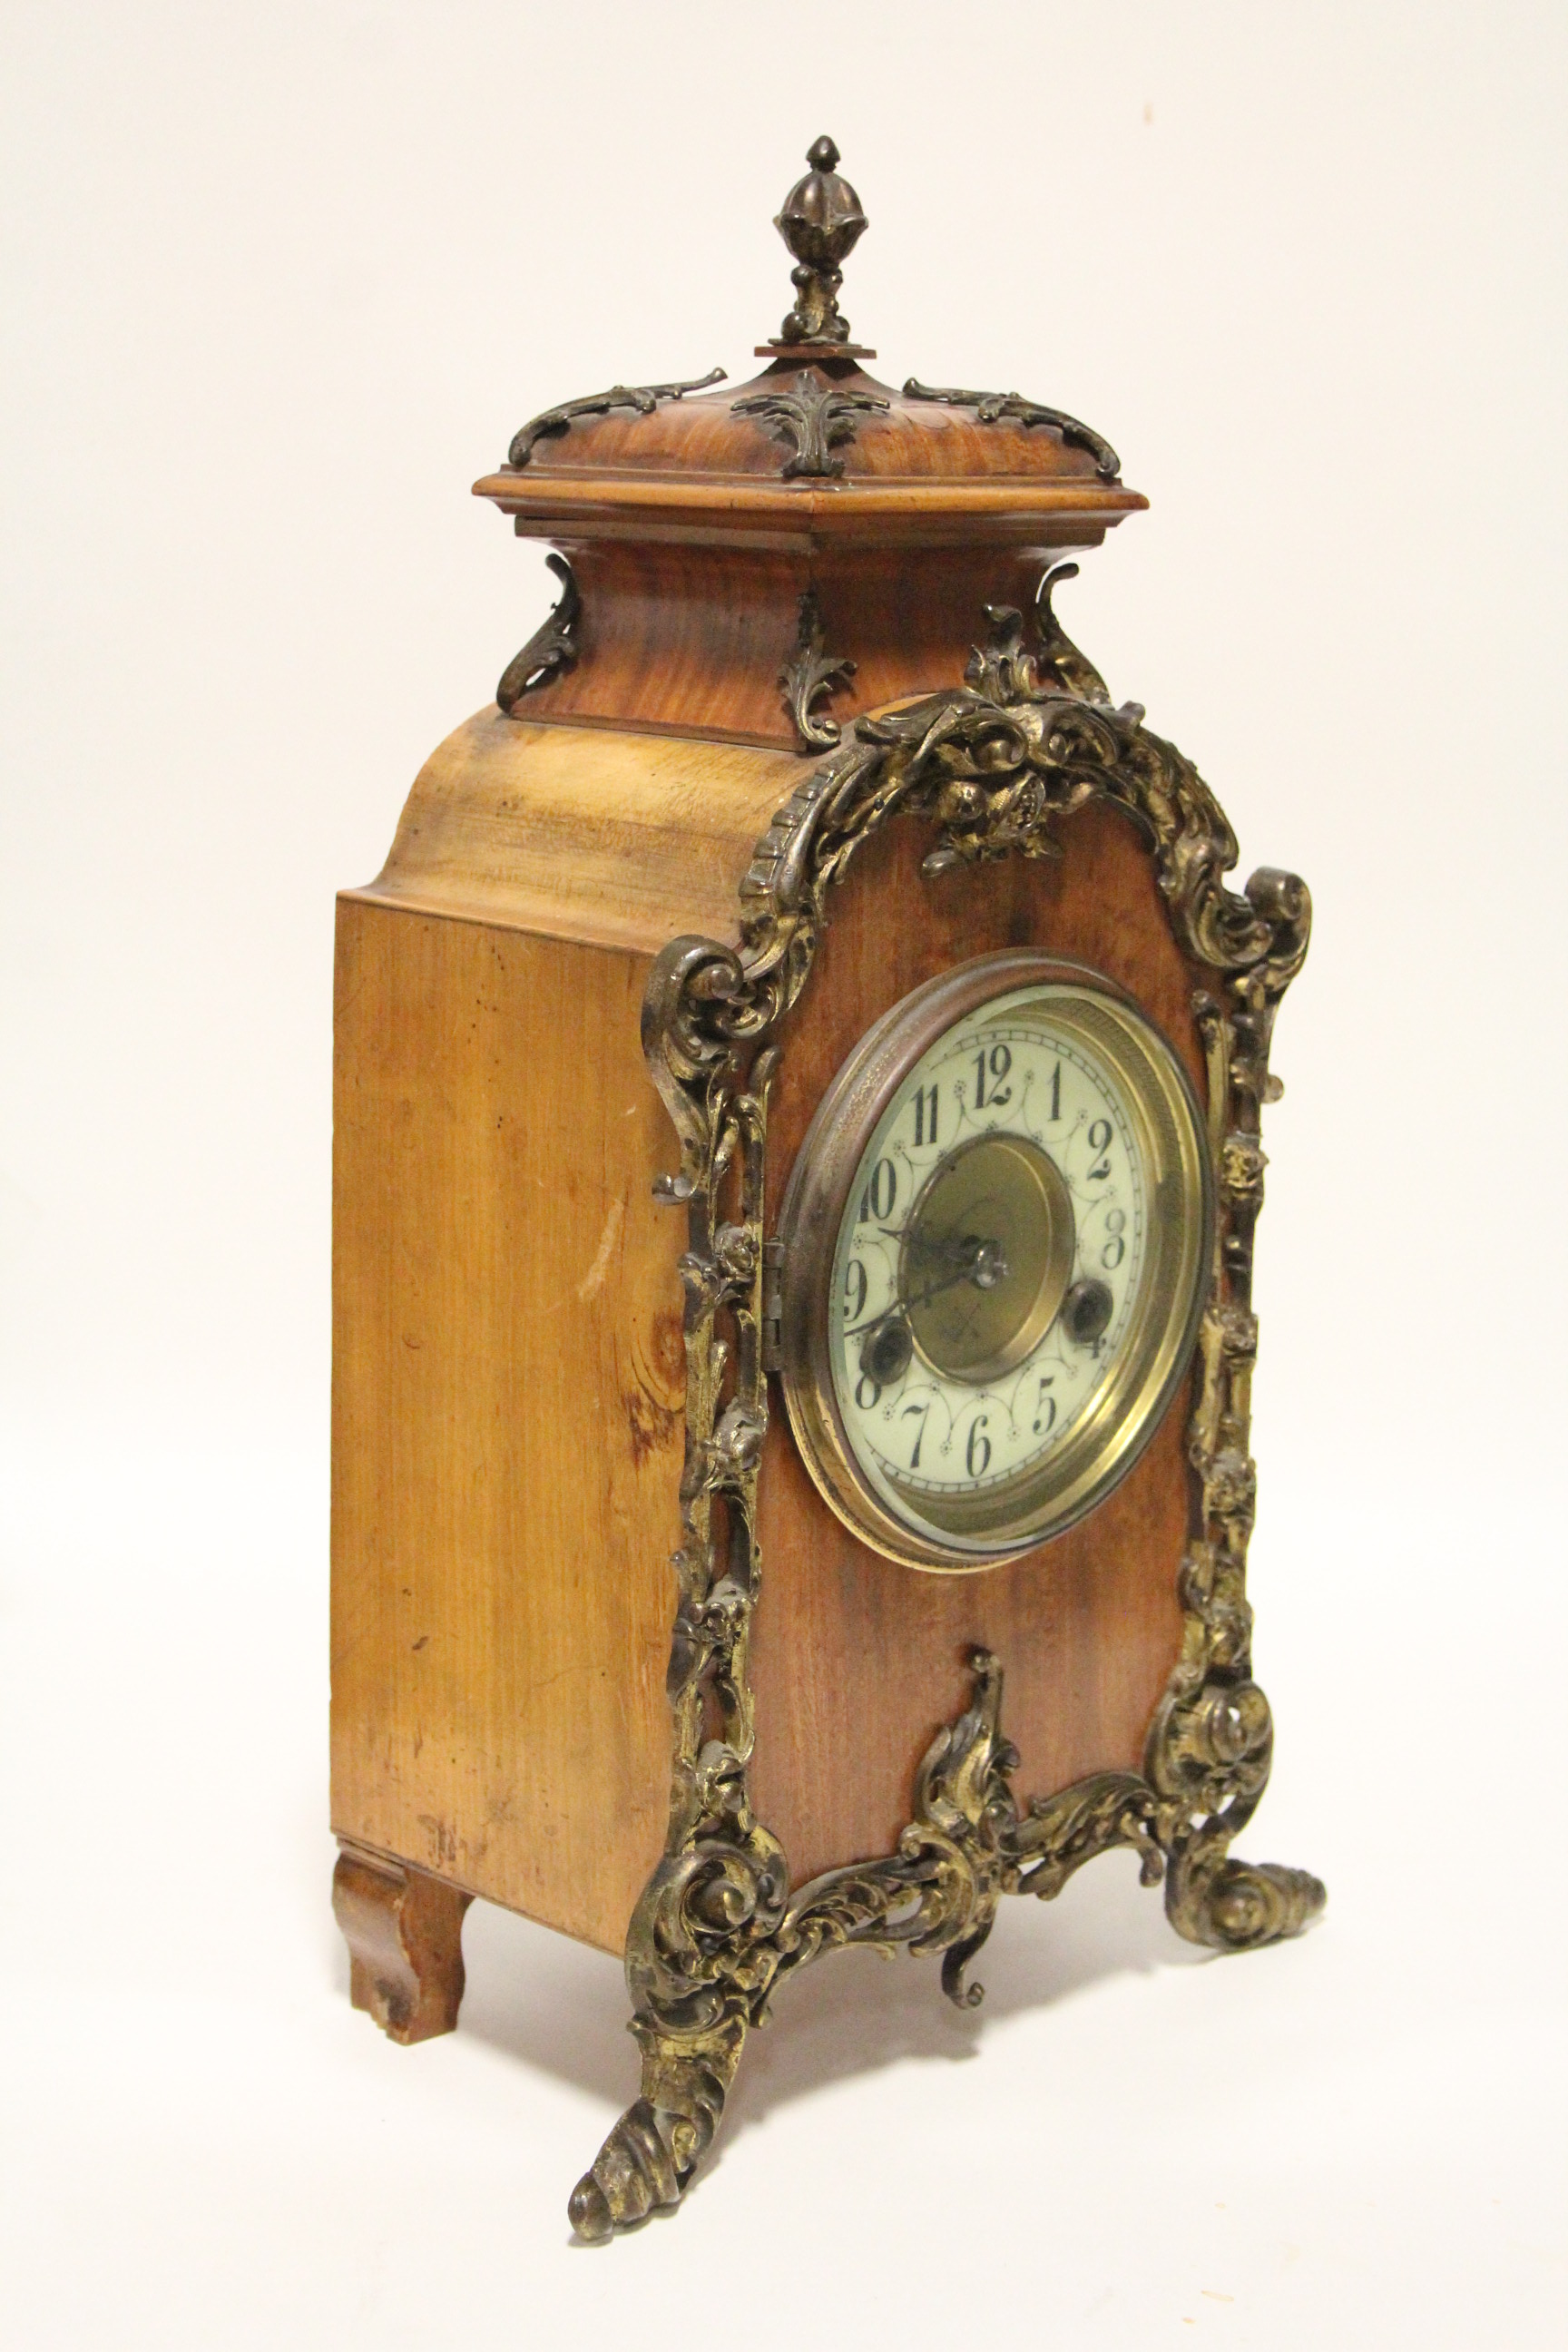 A late 19th century German rococo-style mantel clock, the 4” white enamel dial with Arabic numerals, - Image 2 of 5